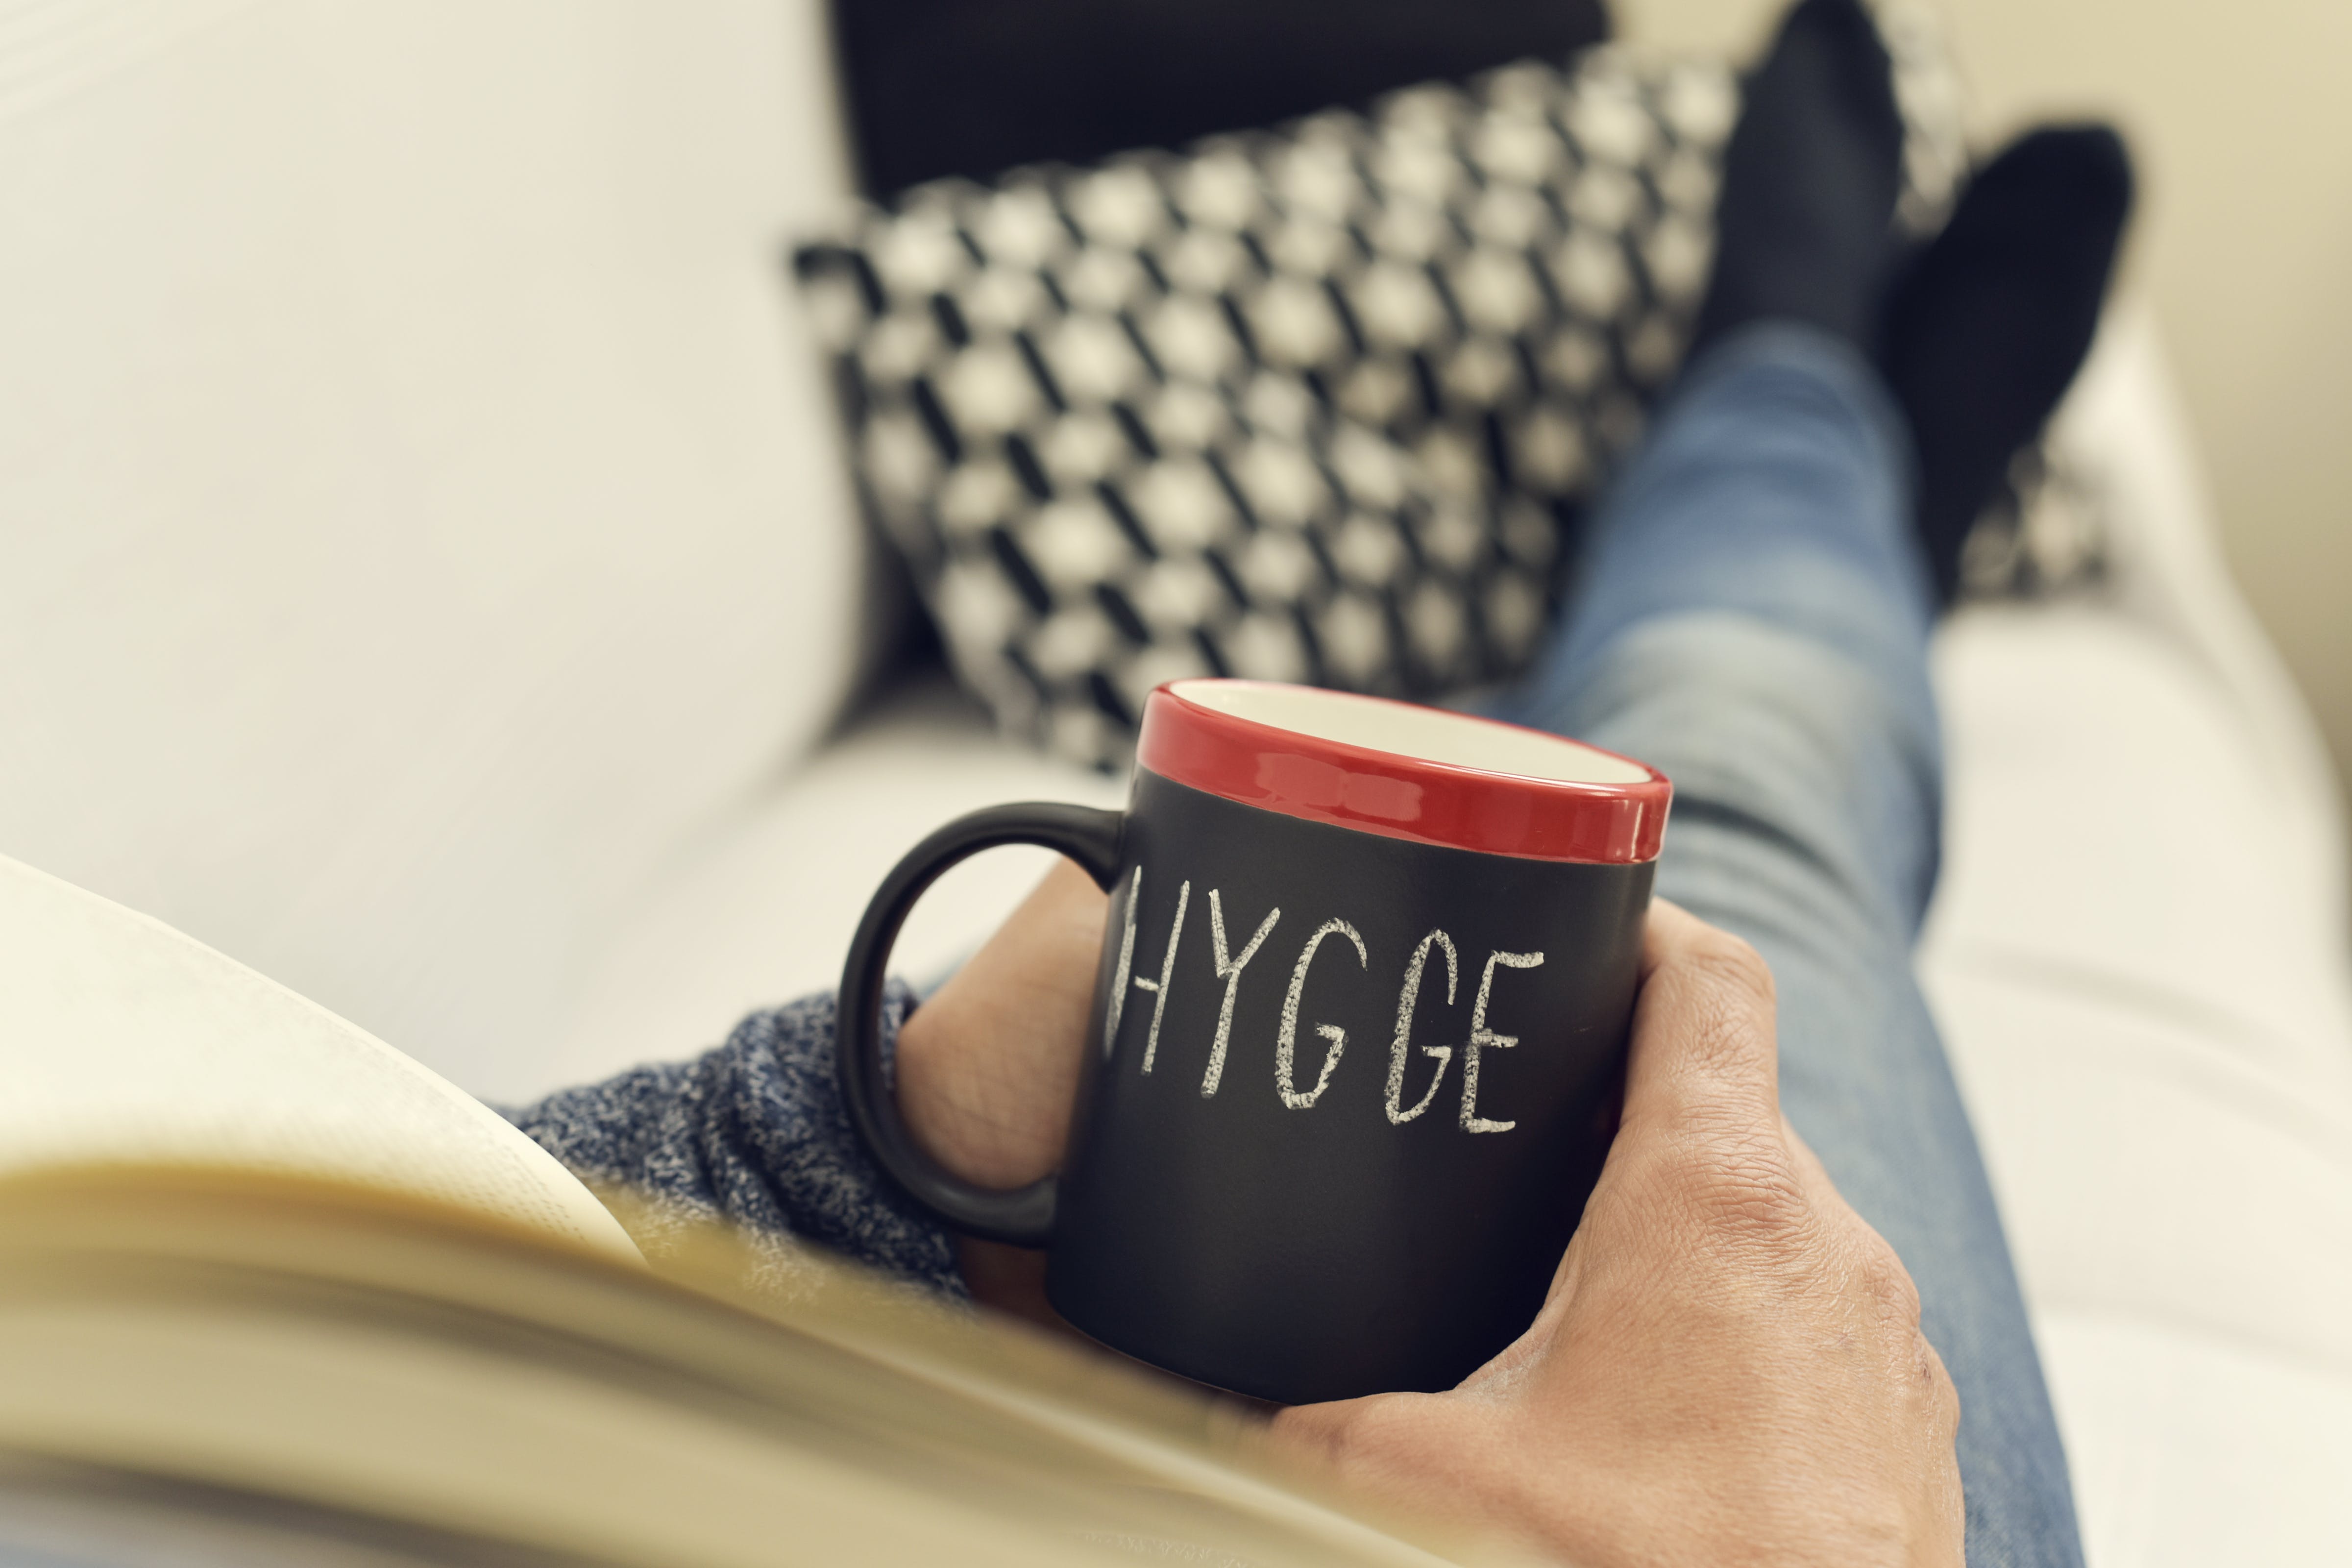 Hygge means coziness or warmth.